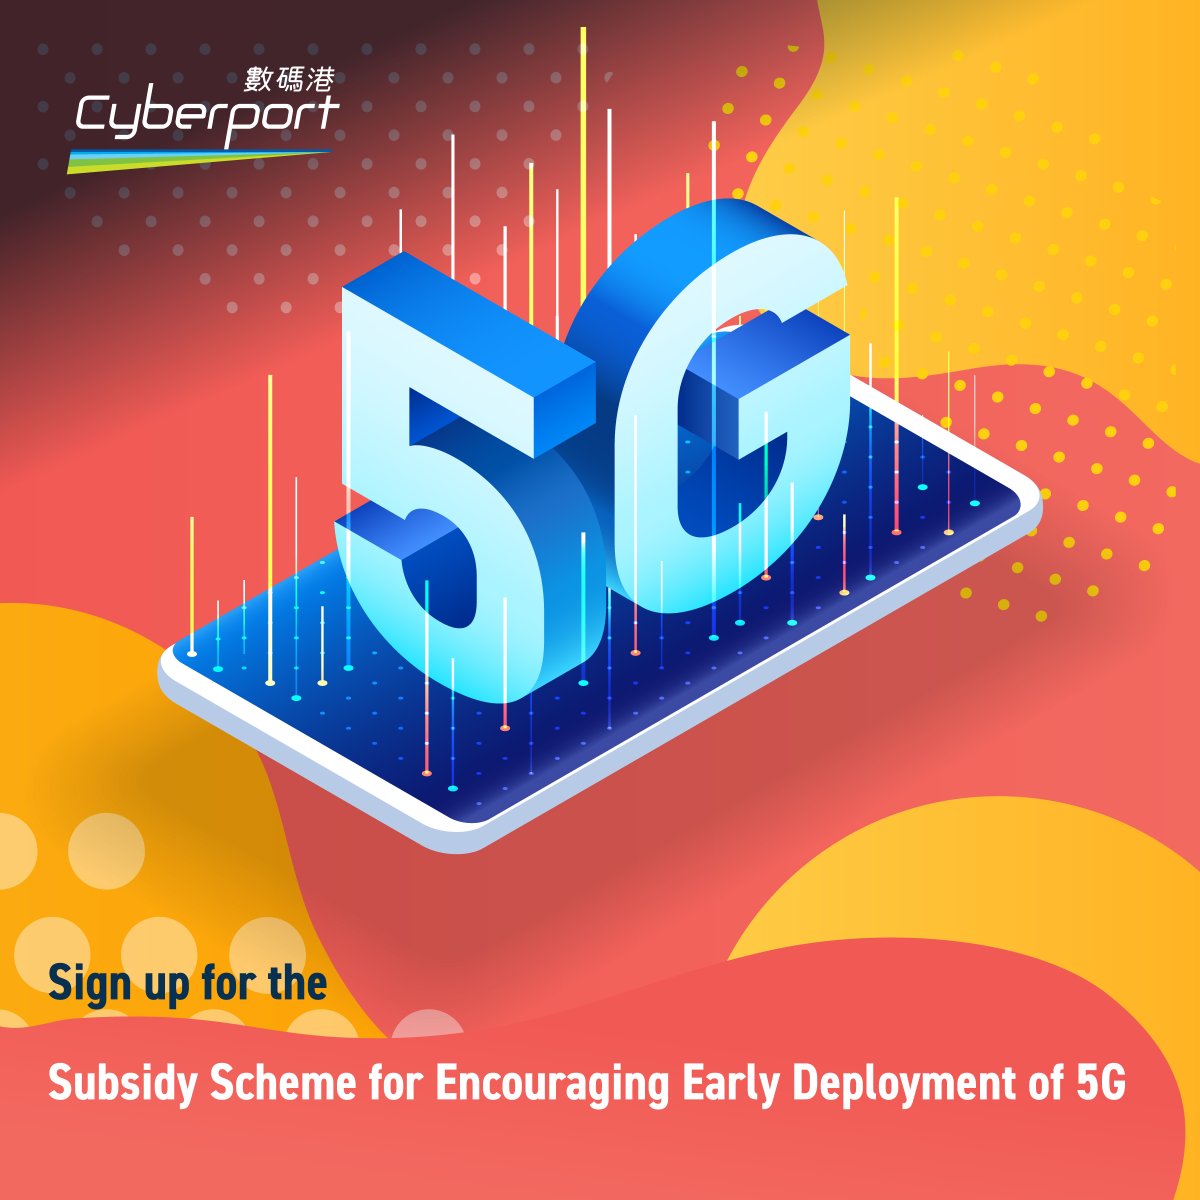 Sign up for the “Subsidy Scheme for Encouraging Early Deployment of 5G” The deadline to apply for the “Subsidy Scheme for Encouraging Early Deployment of #5G” under Office of the Communications Authority (OFCA) has been extended to 31 December 2022. #Cyberport #5GTechnology